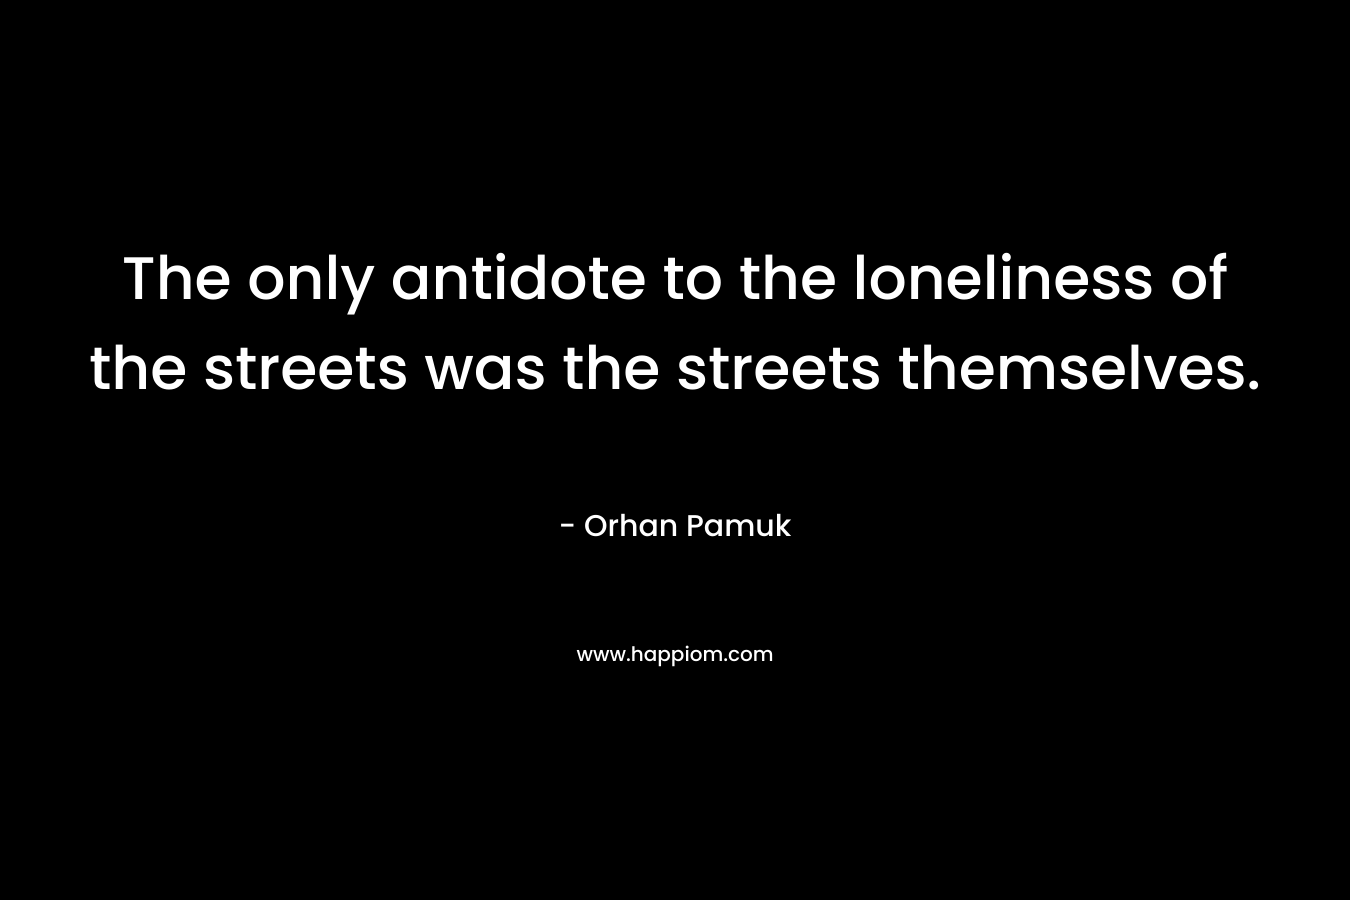 The only antidote to the loneliness of the streets was the streets themselves. – Orhan Pamuk